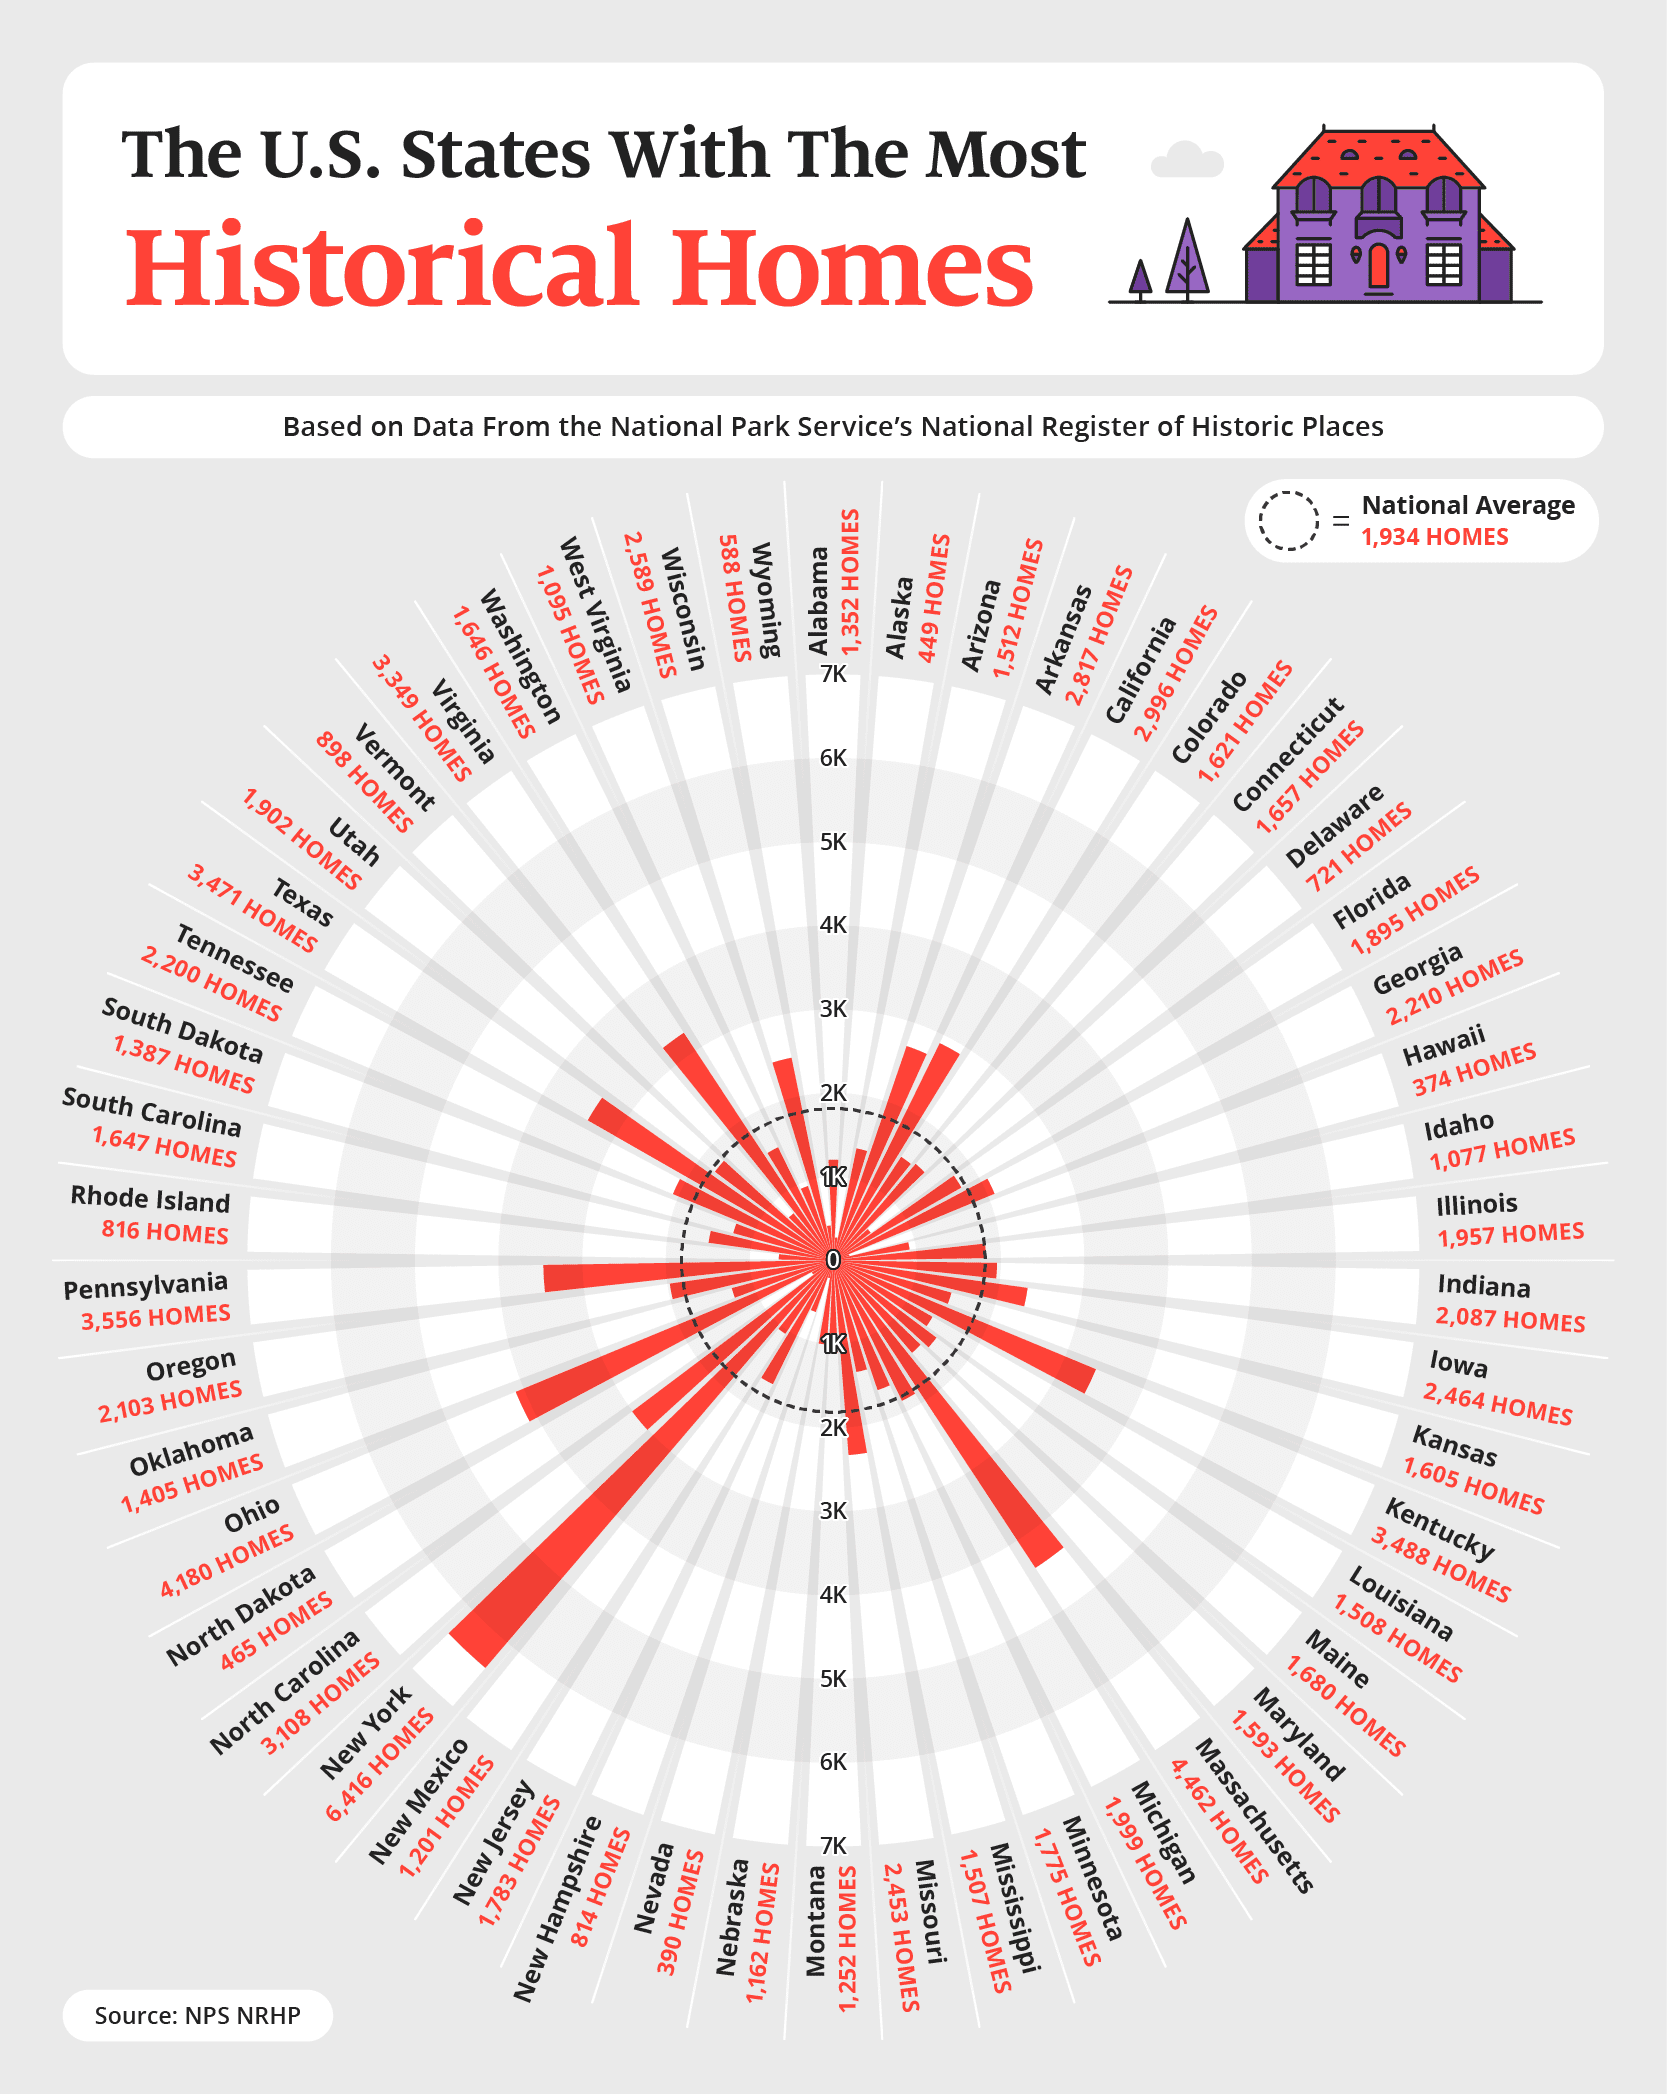 Chart showing the U.S. states with the most historical homes